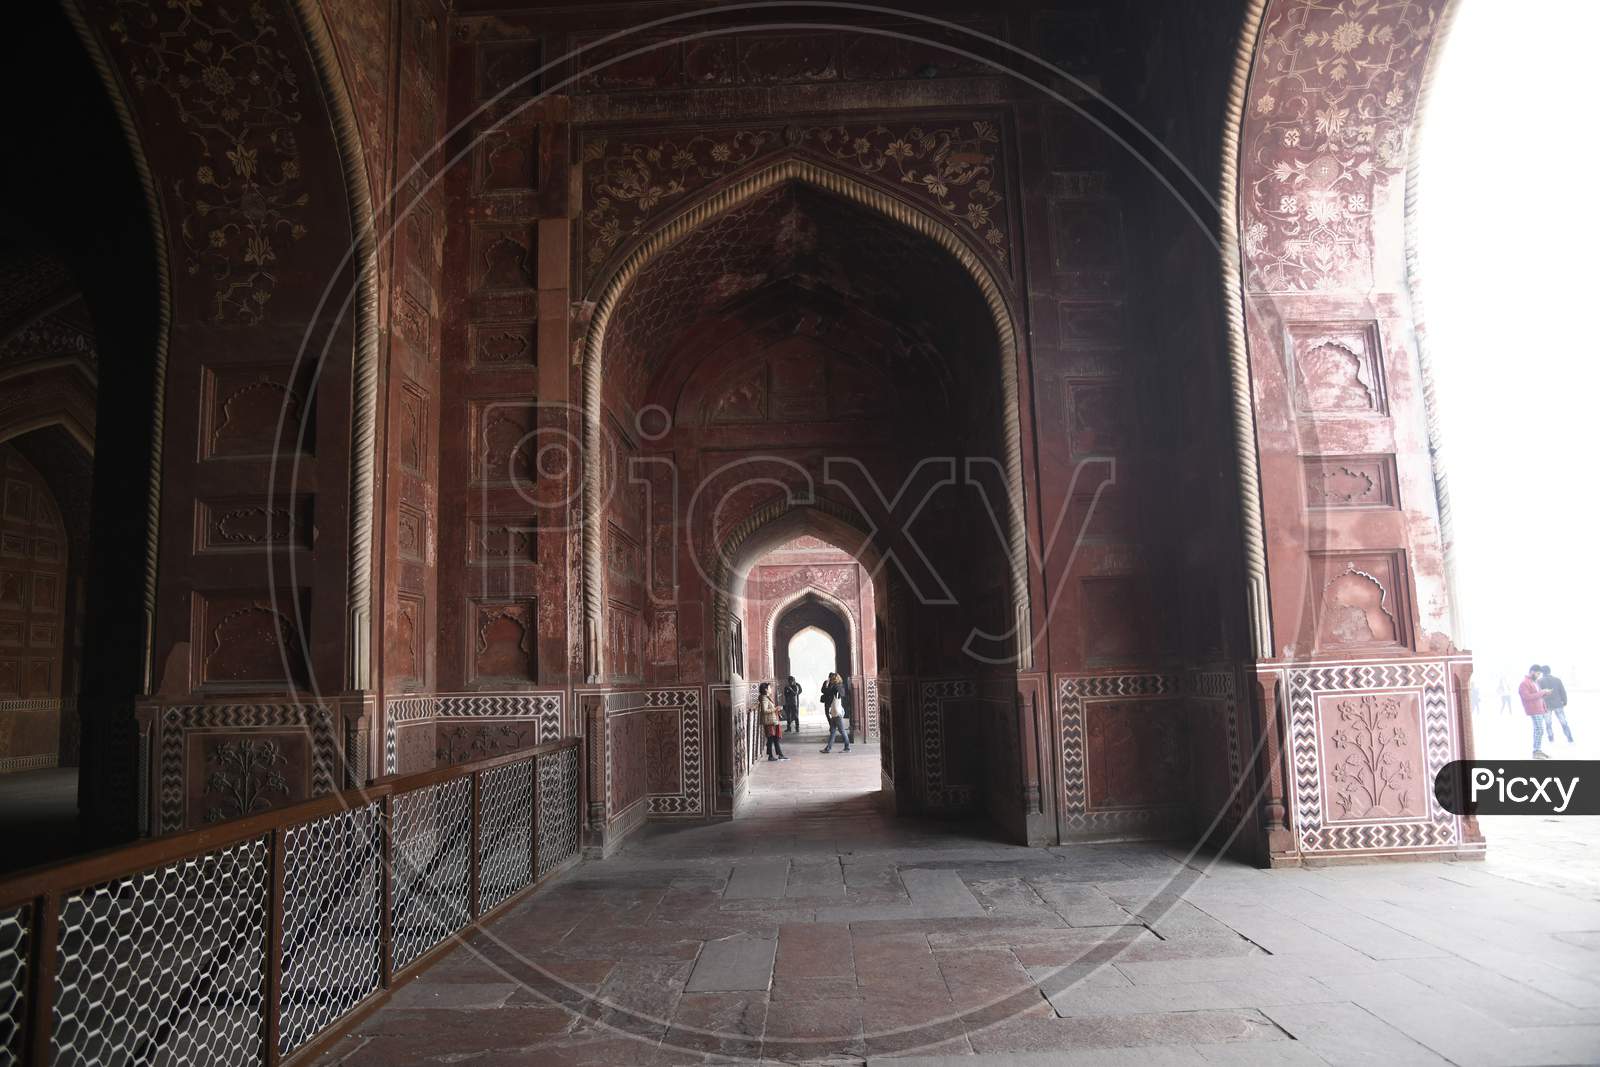 Architecture Of Agra Fort With a Corridor